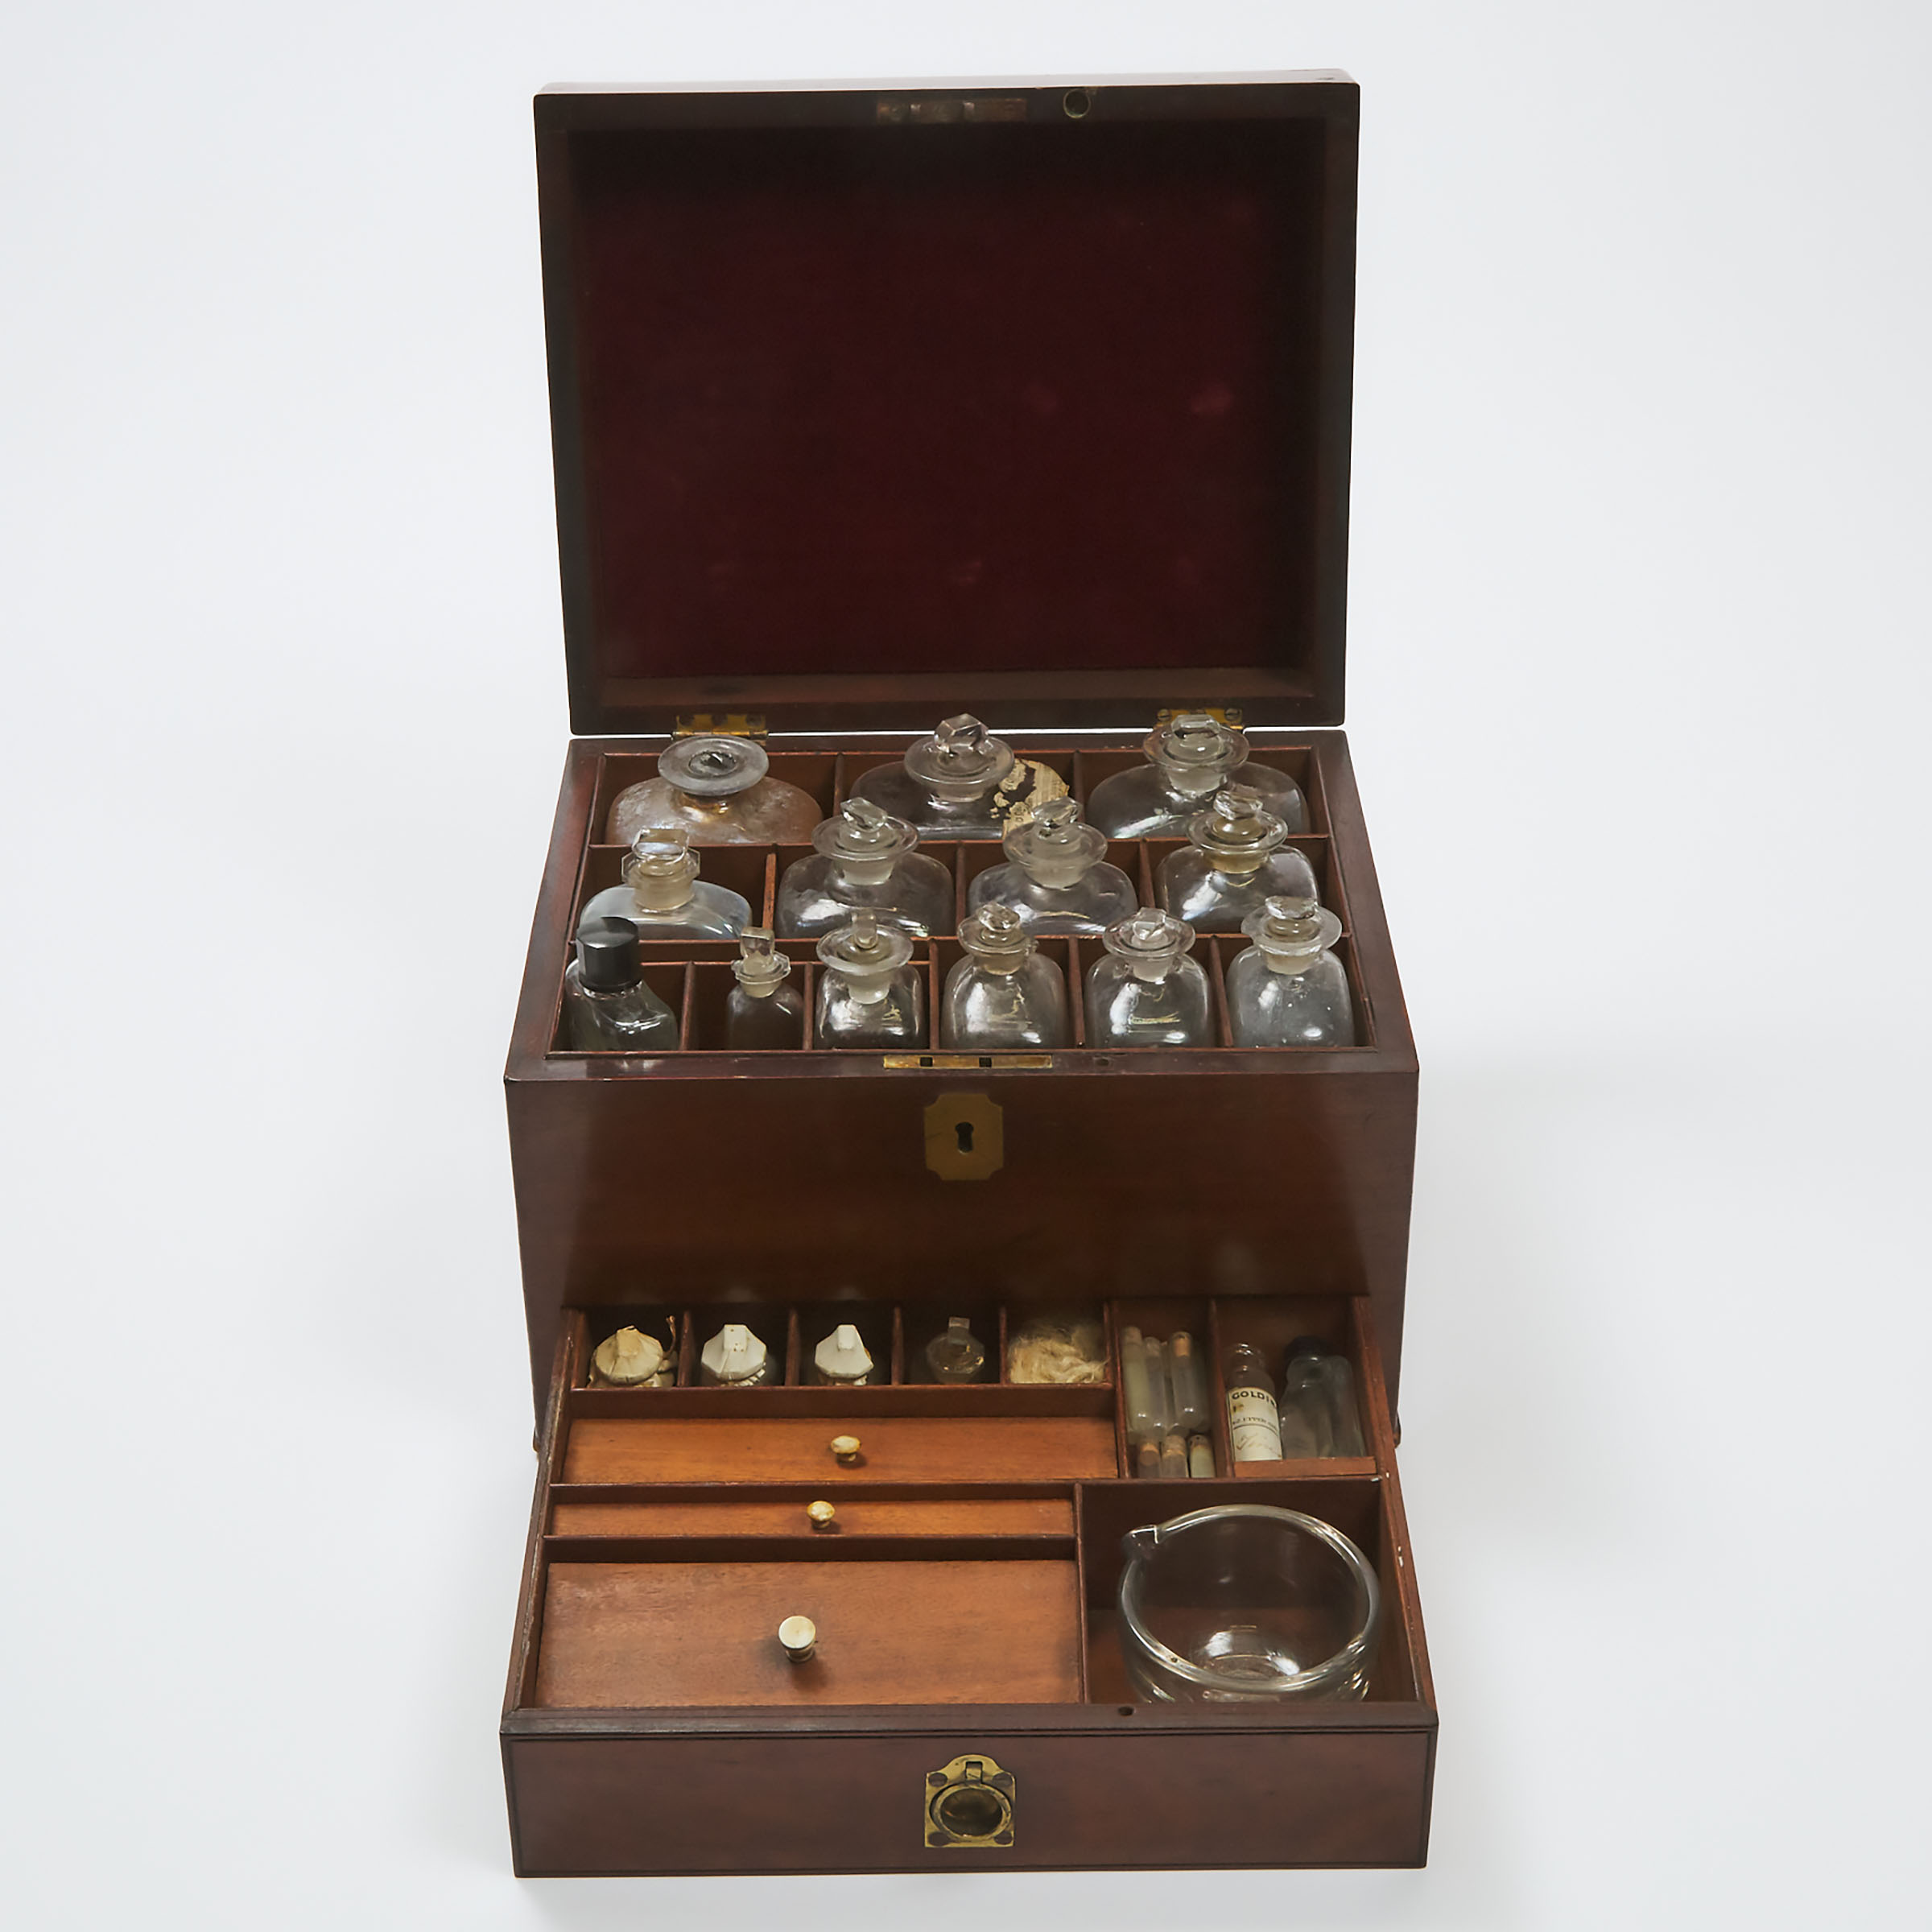 Physician's Mahogany Pharmaceutical Campaign Chest, mid 19th century